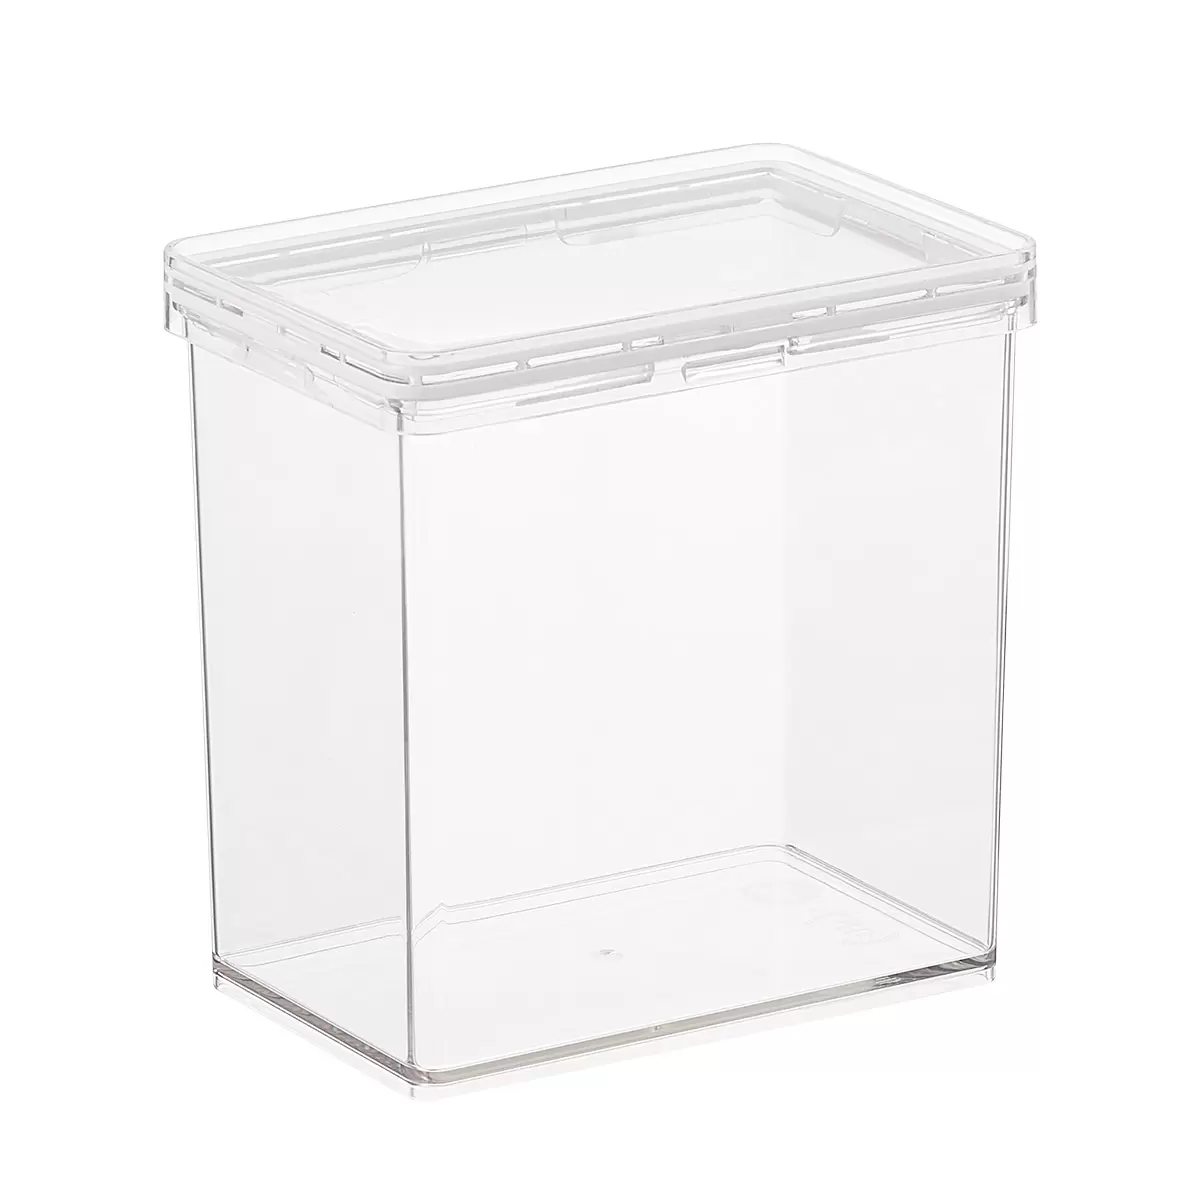 https://www.containerstore.com/catalogimages/364044/10077095-T.H.E.-pantry-canister-medi.jpg